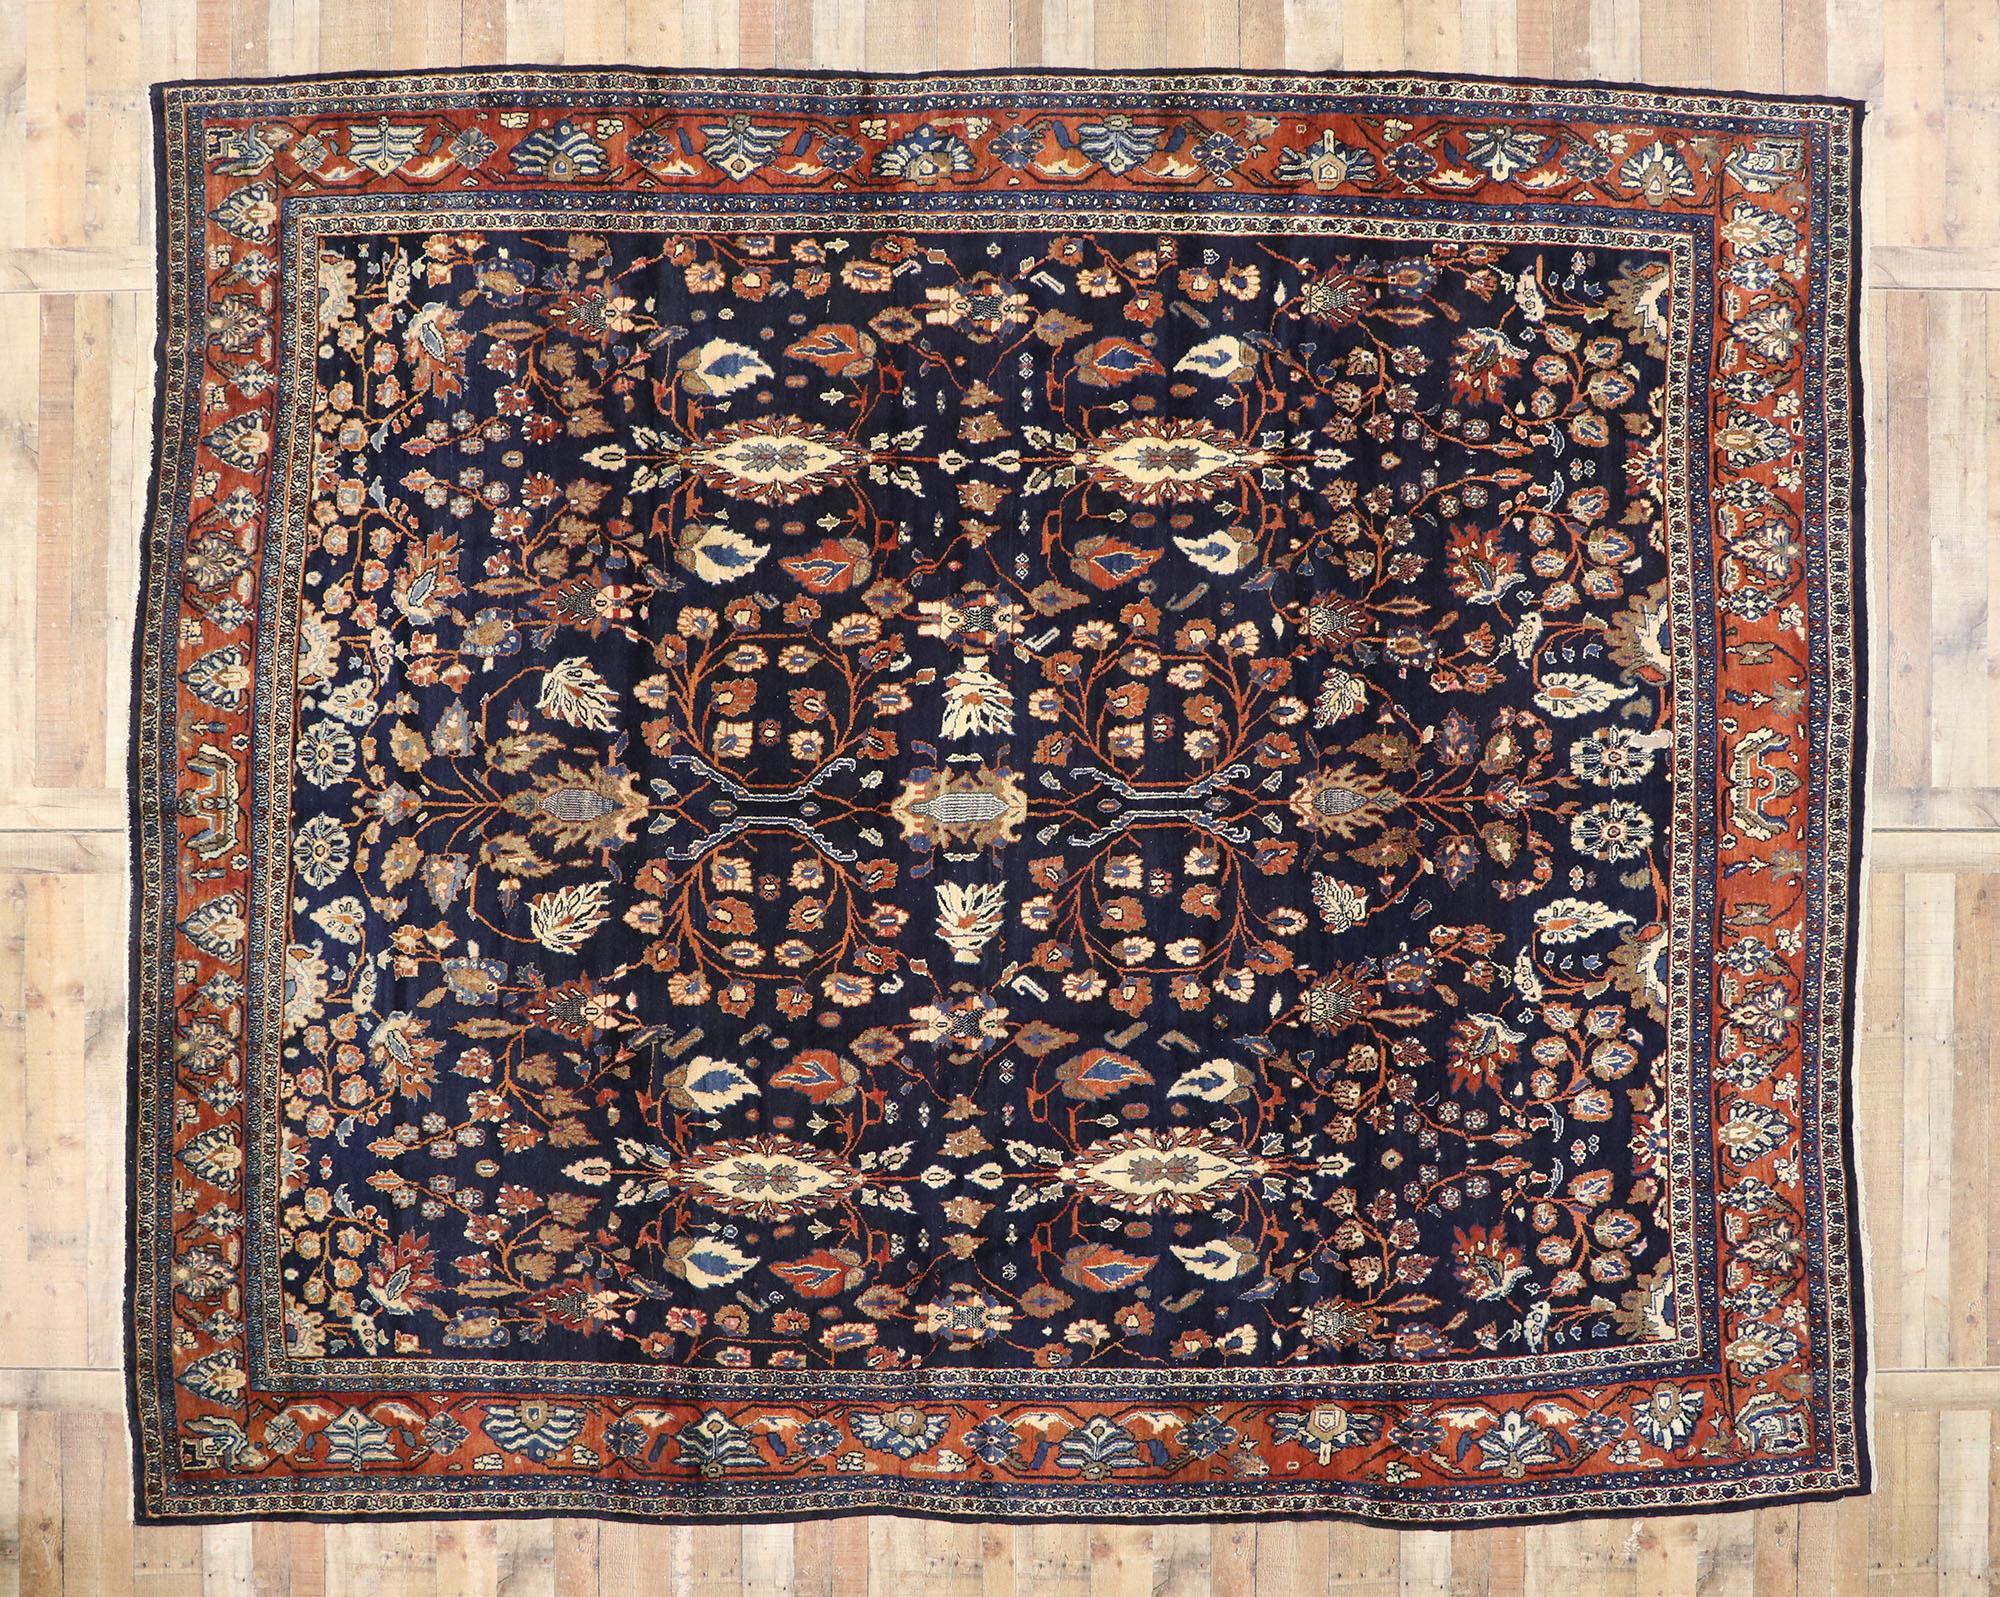 Wool Antique Persian Bibikabad Rug with Old World French Chateau Style For Sale